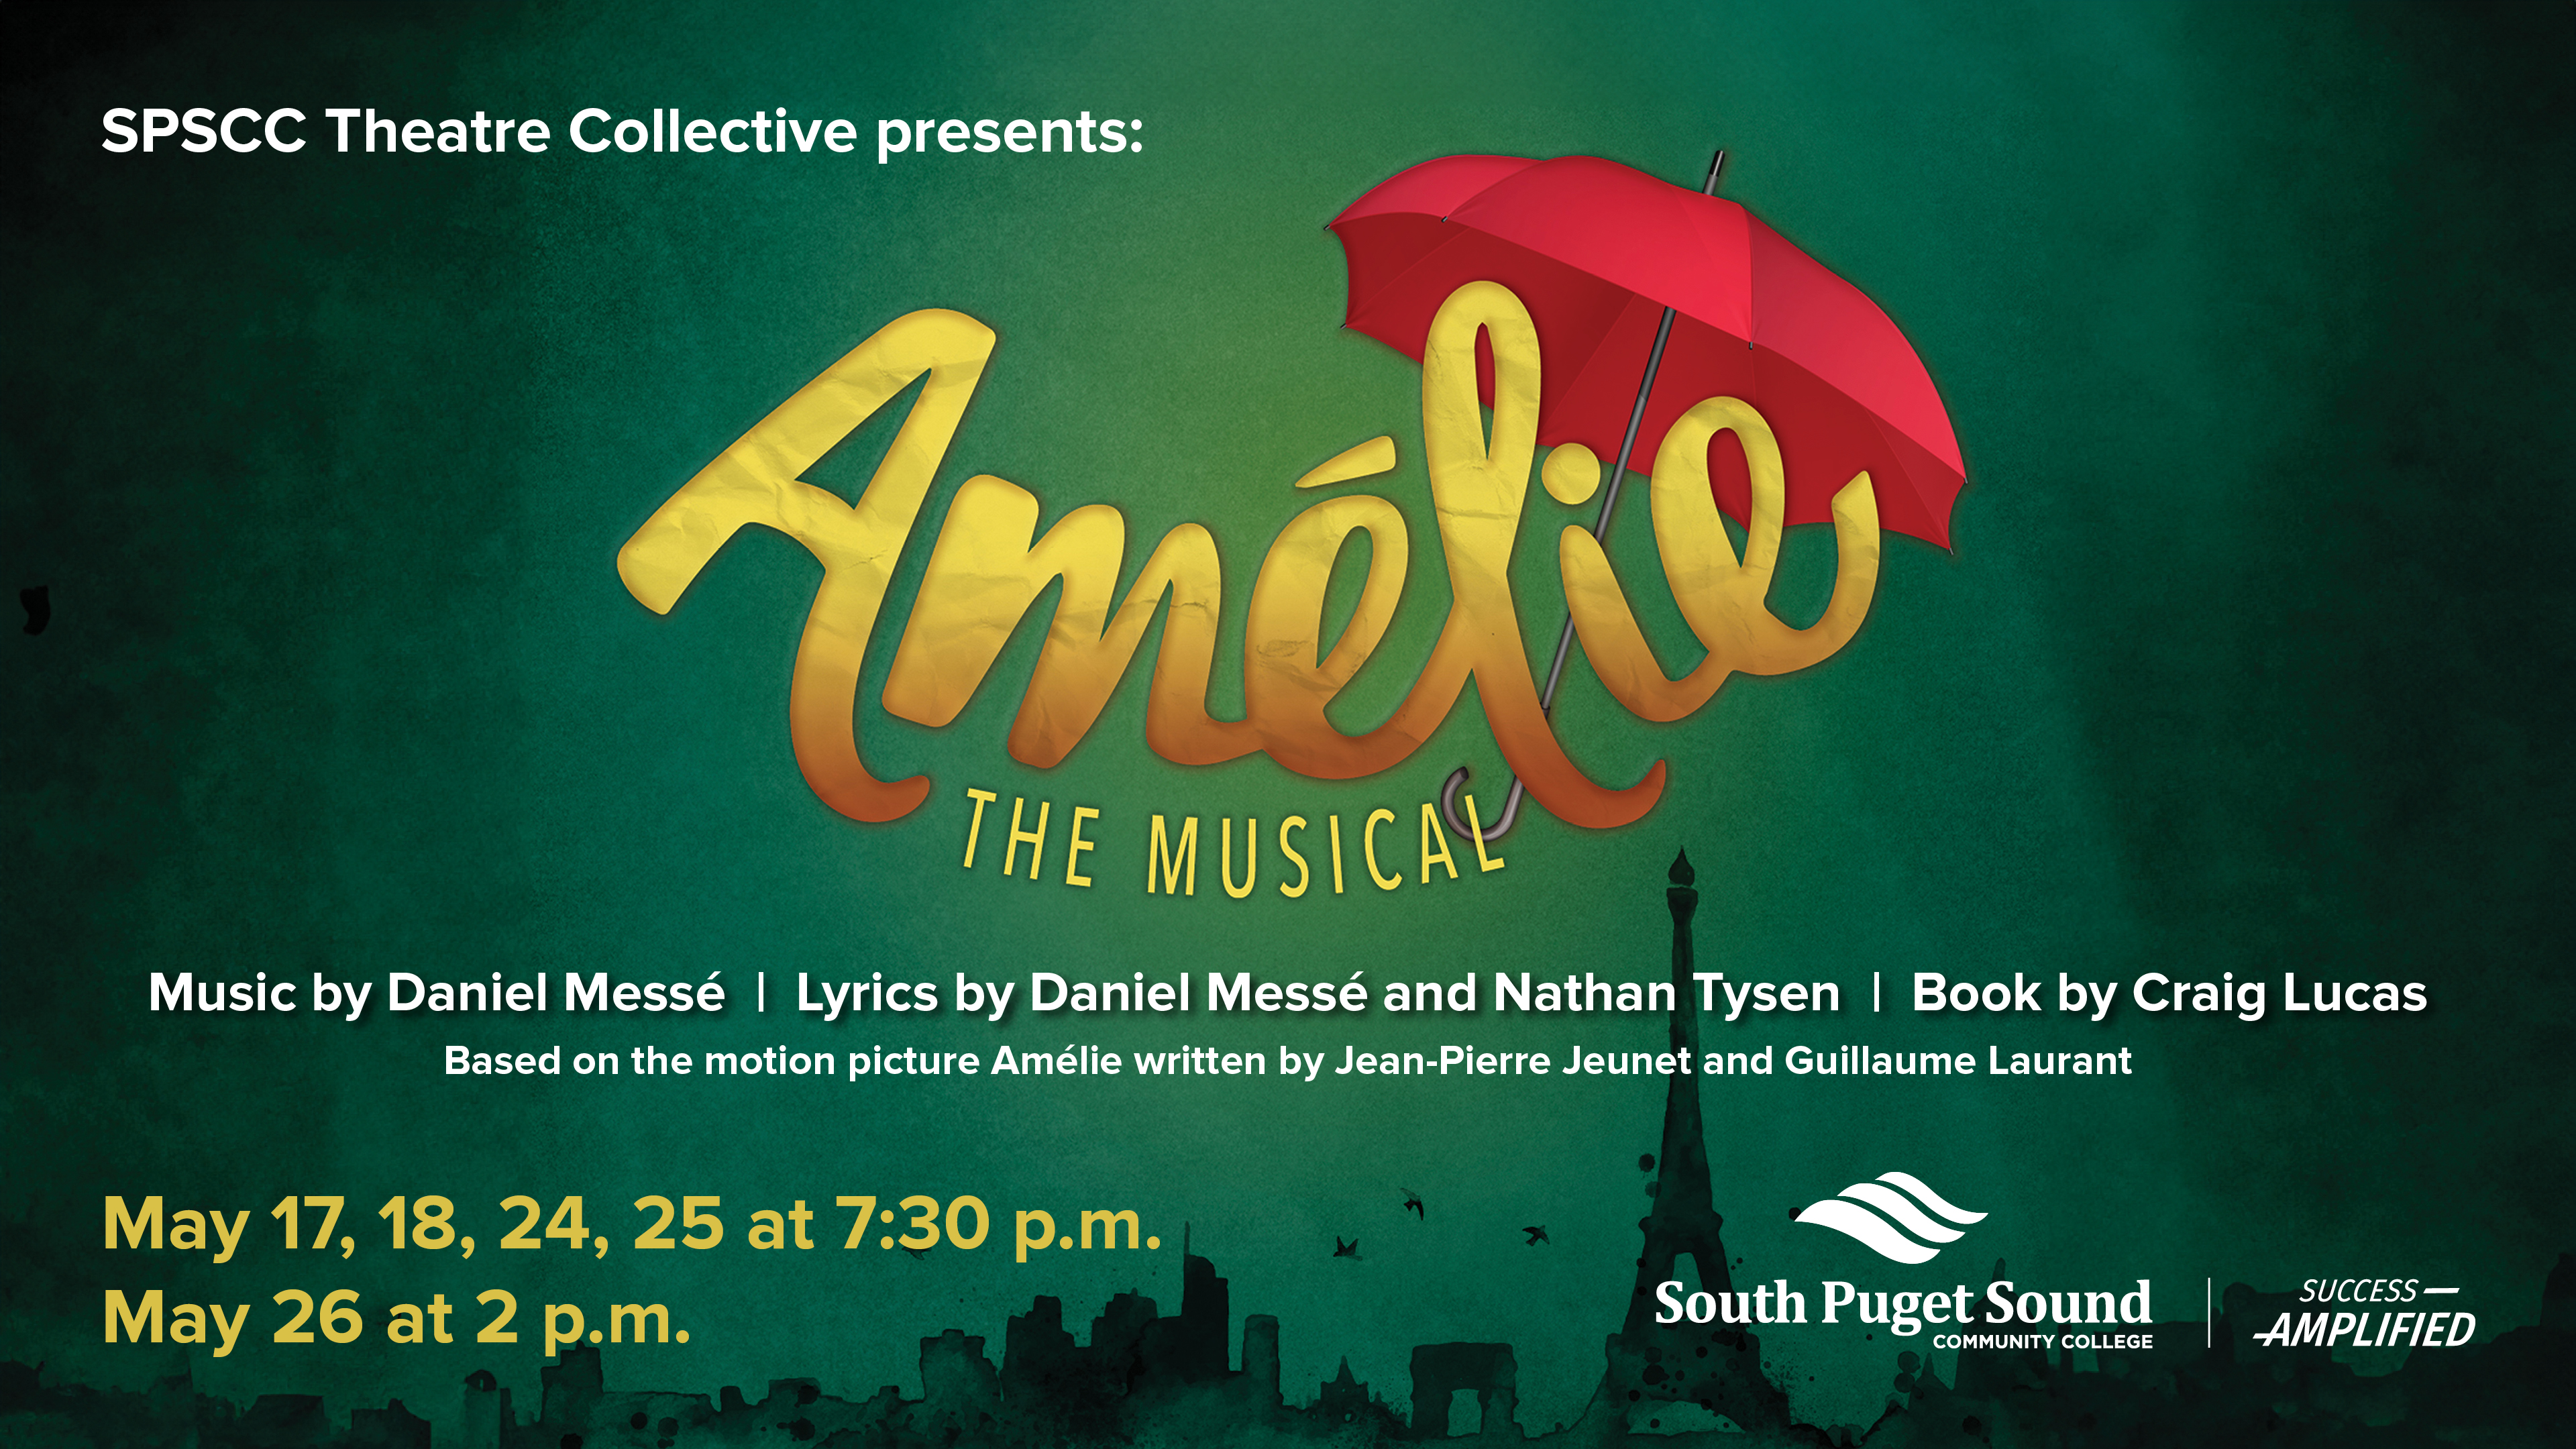 SPSCC Theatre Collective presents Amélie the Musical. May 17, 18, 24, 25 at 7:30 p.m. May 26 at 2 p.m.